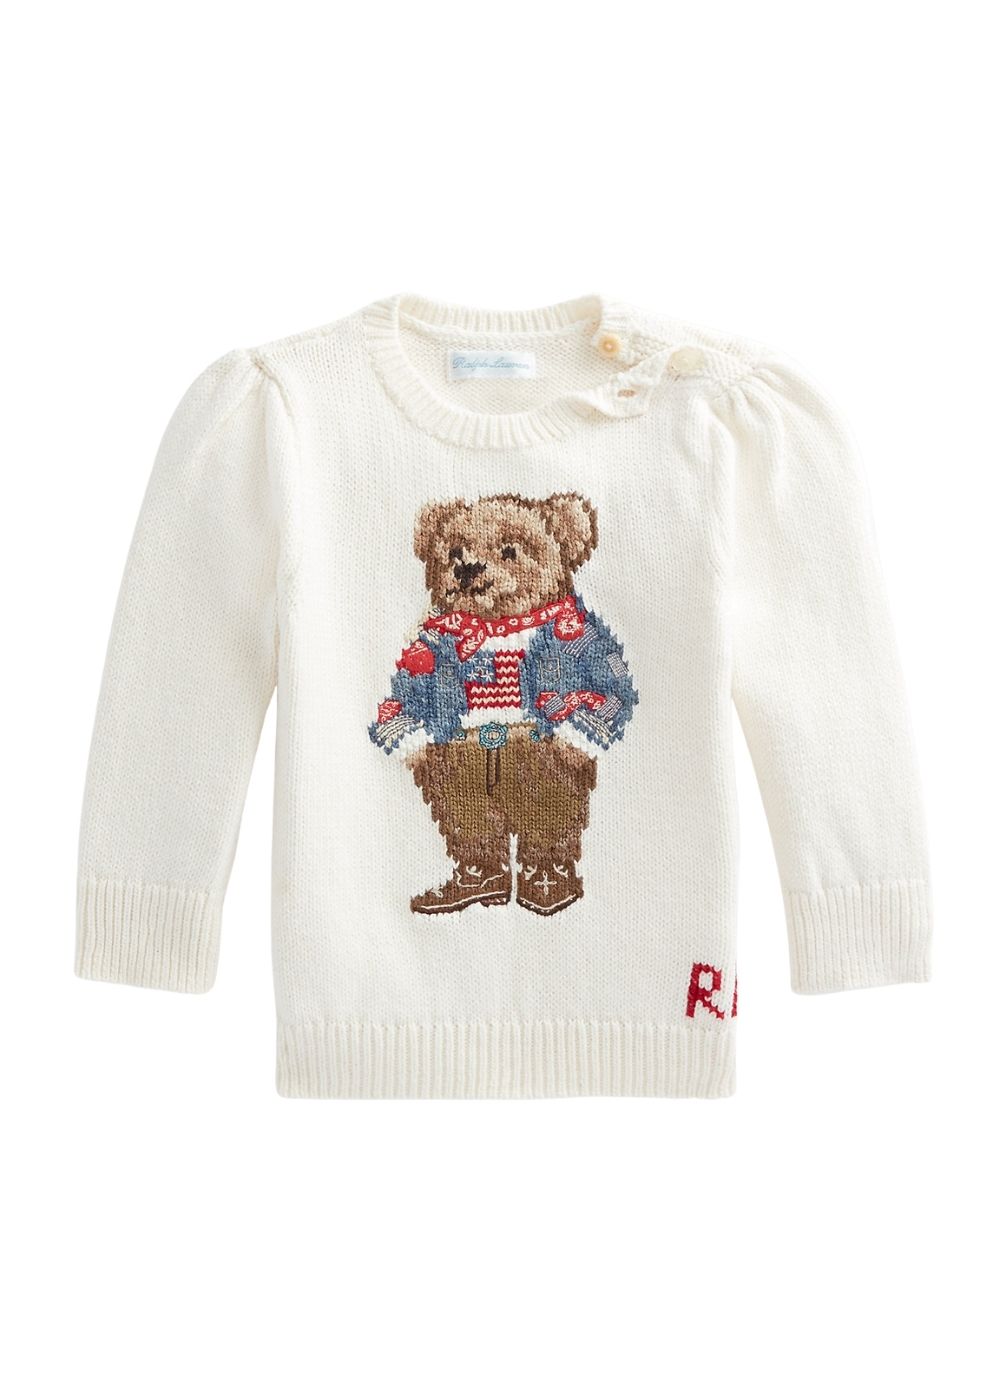 Featured image for “POLO RALPH LAUREN MAGLIA BEAR”